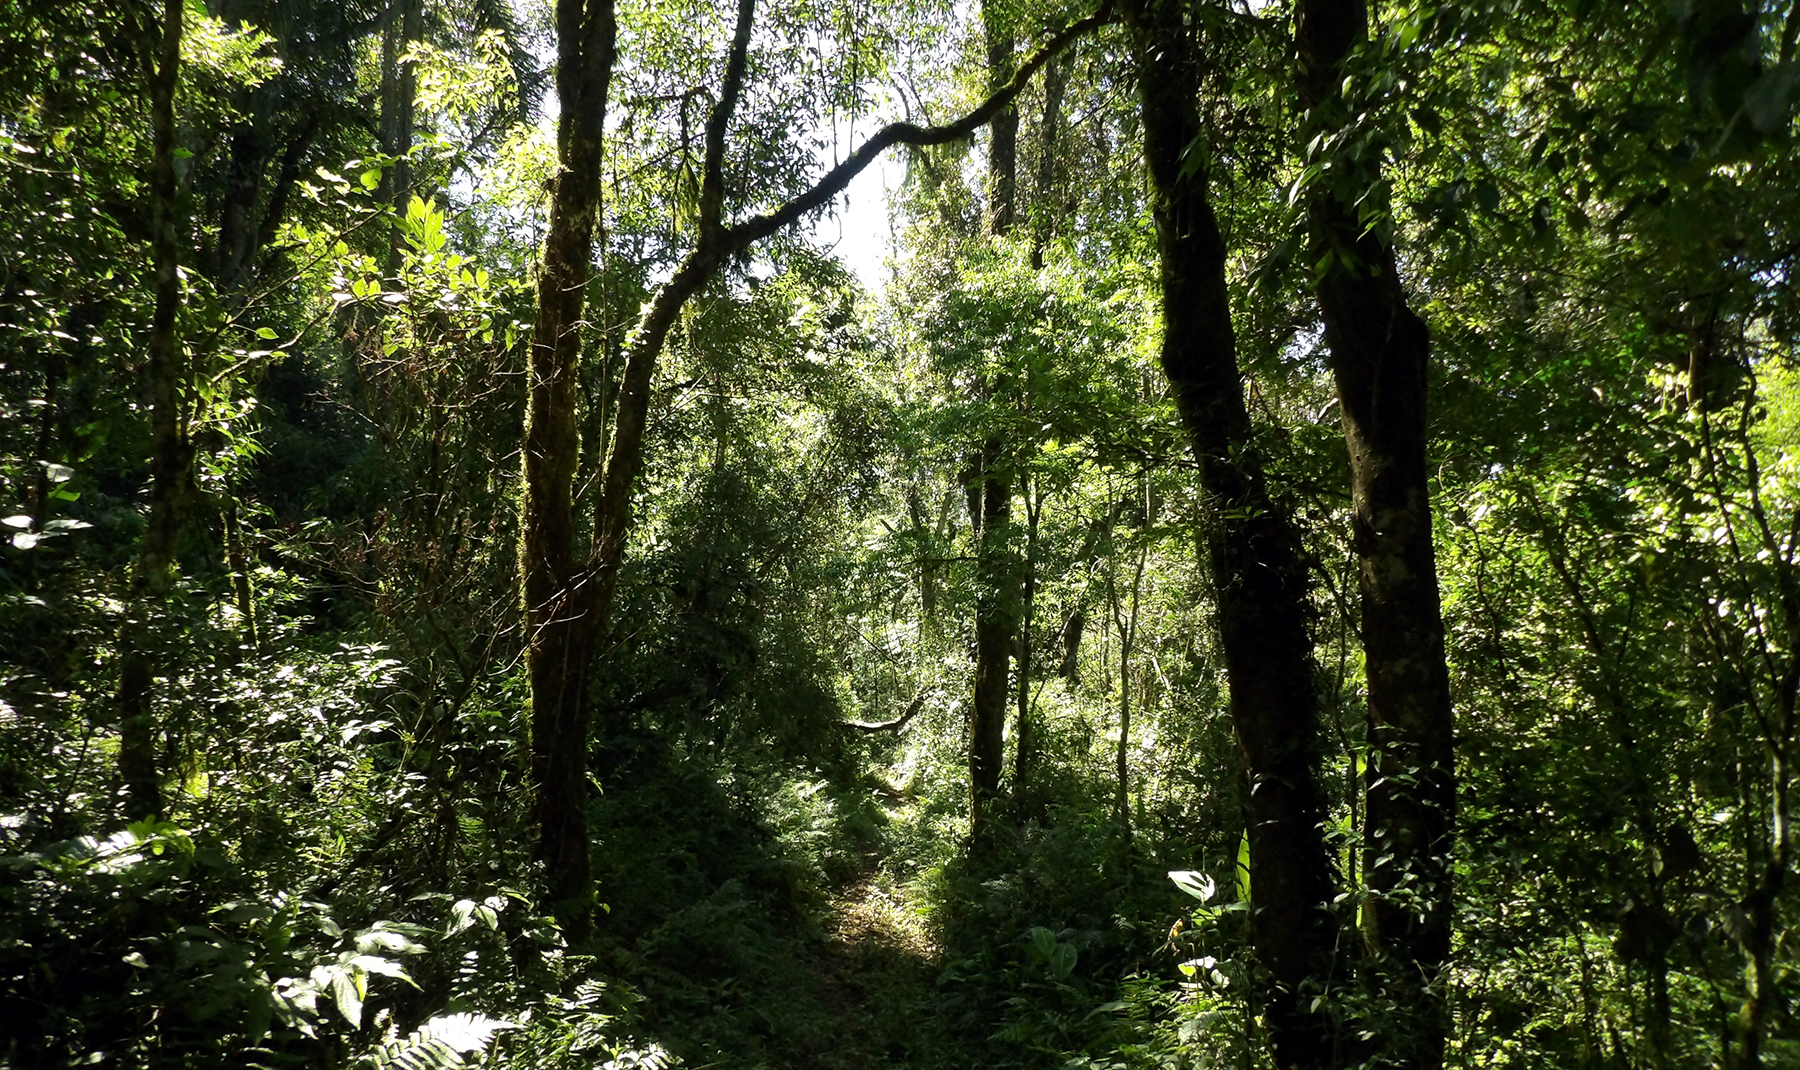 This type of forest is known as Seasonal Semideciduous Forest (SSF), characterized by partial deciduousness during the dry season (usually from April to September). It’s the same type of forest as in our Pontal project.